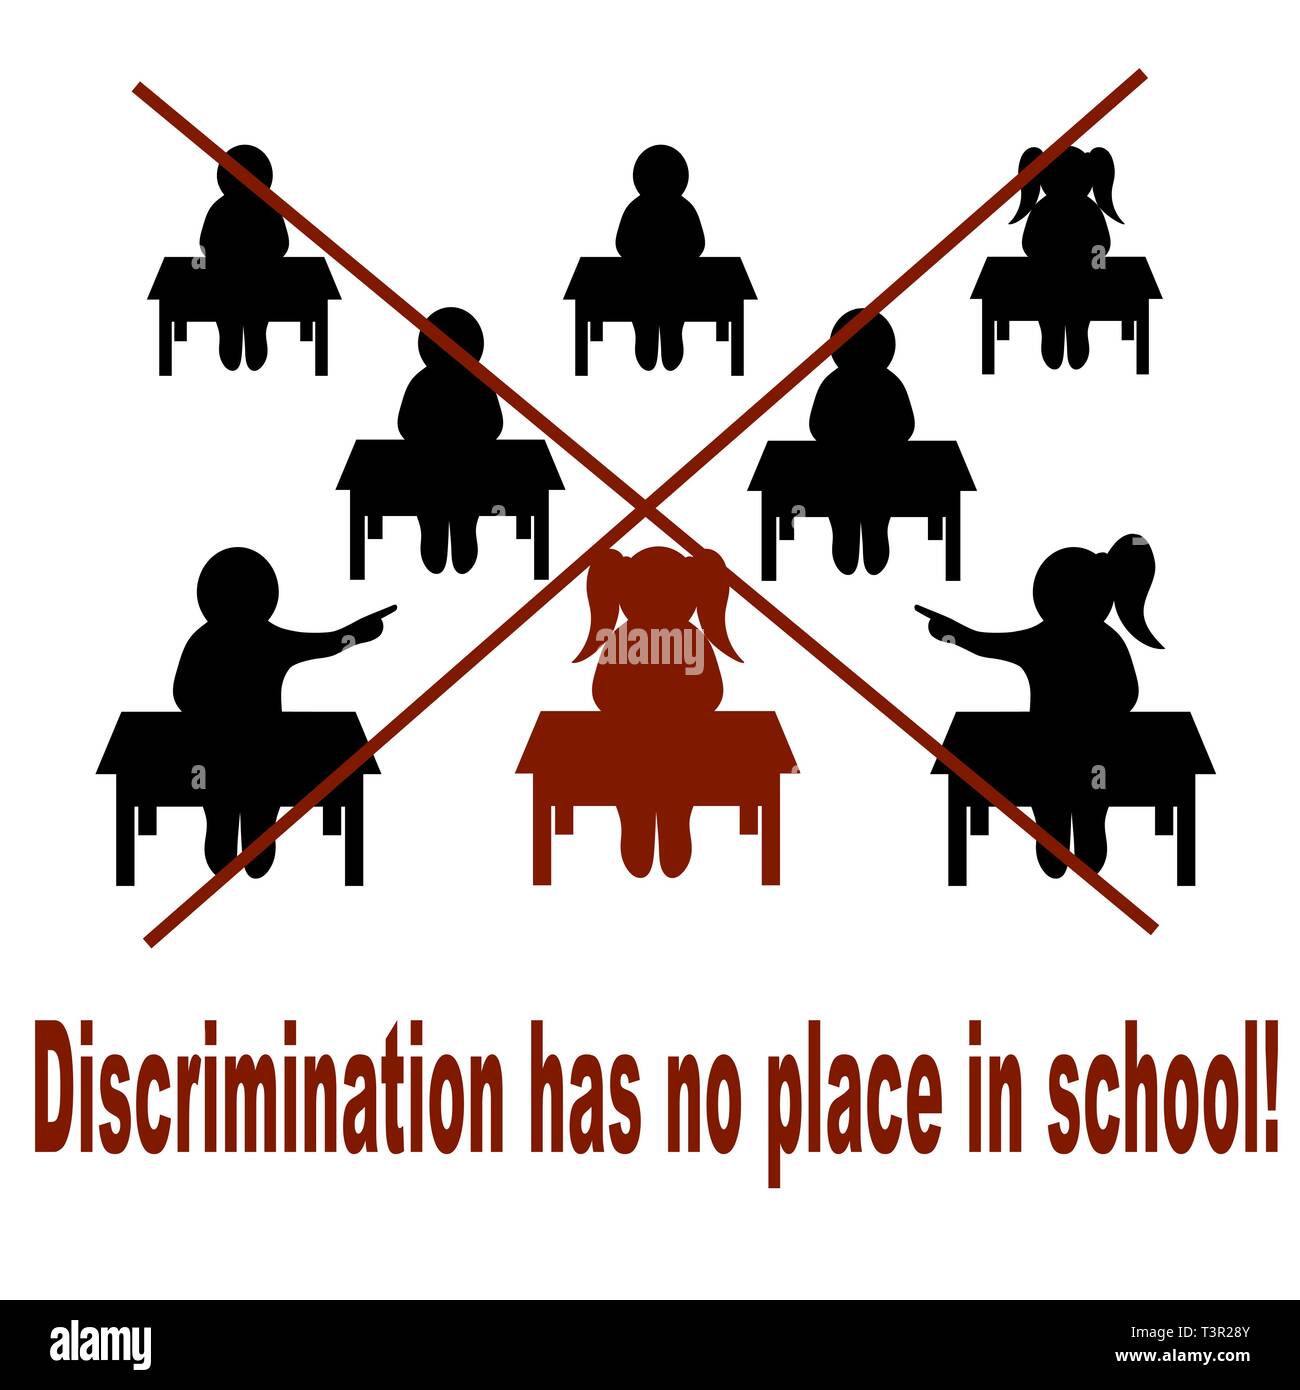 A poster calling for anti-discrimination in school. Stock Vector